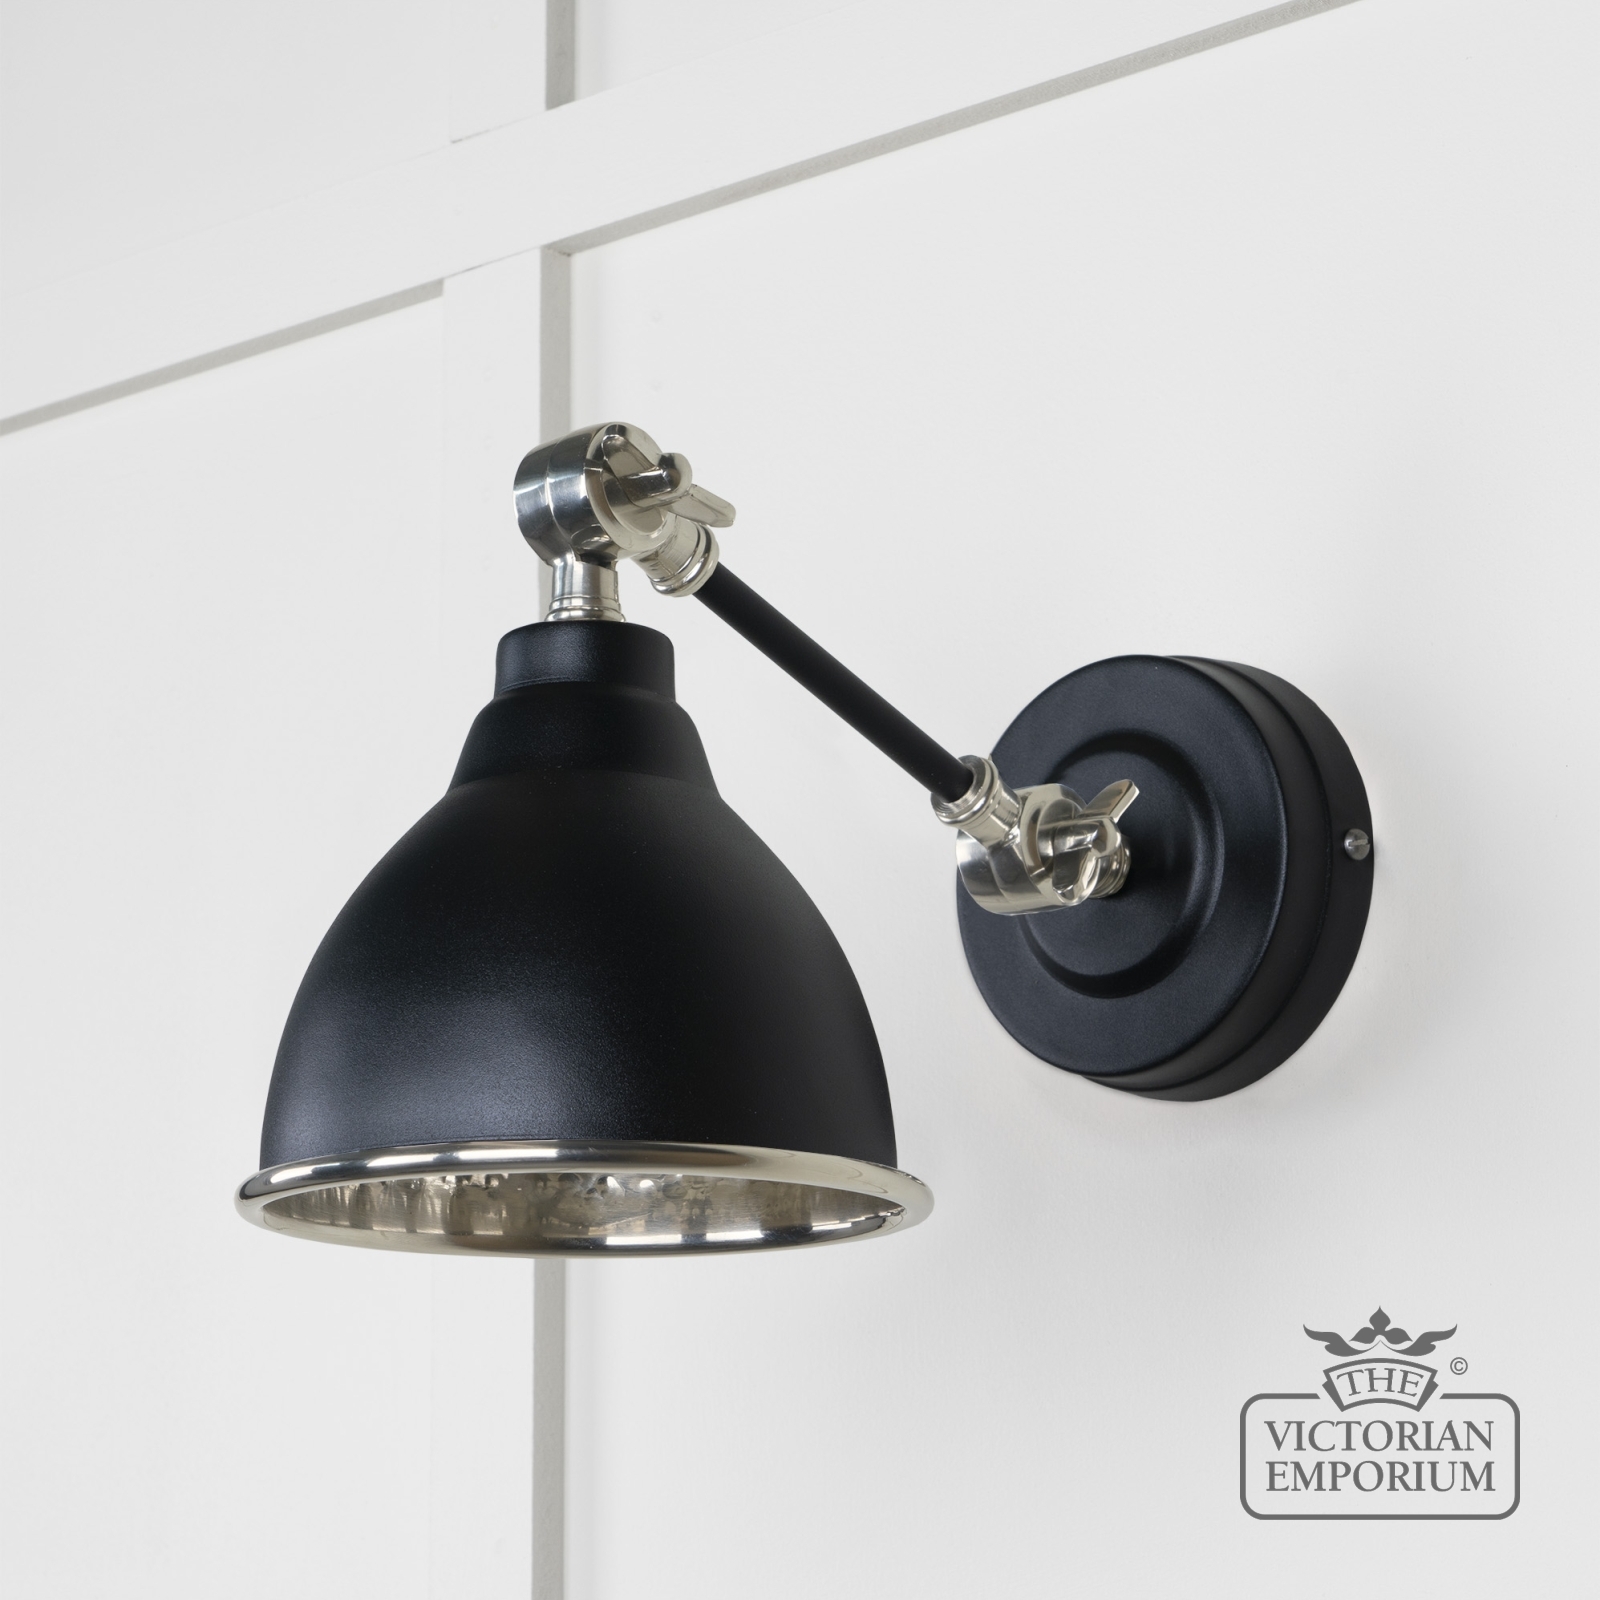 Brindle Wall Light with Hammered Nickel Interior and Black Exterior